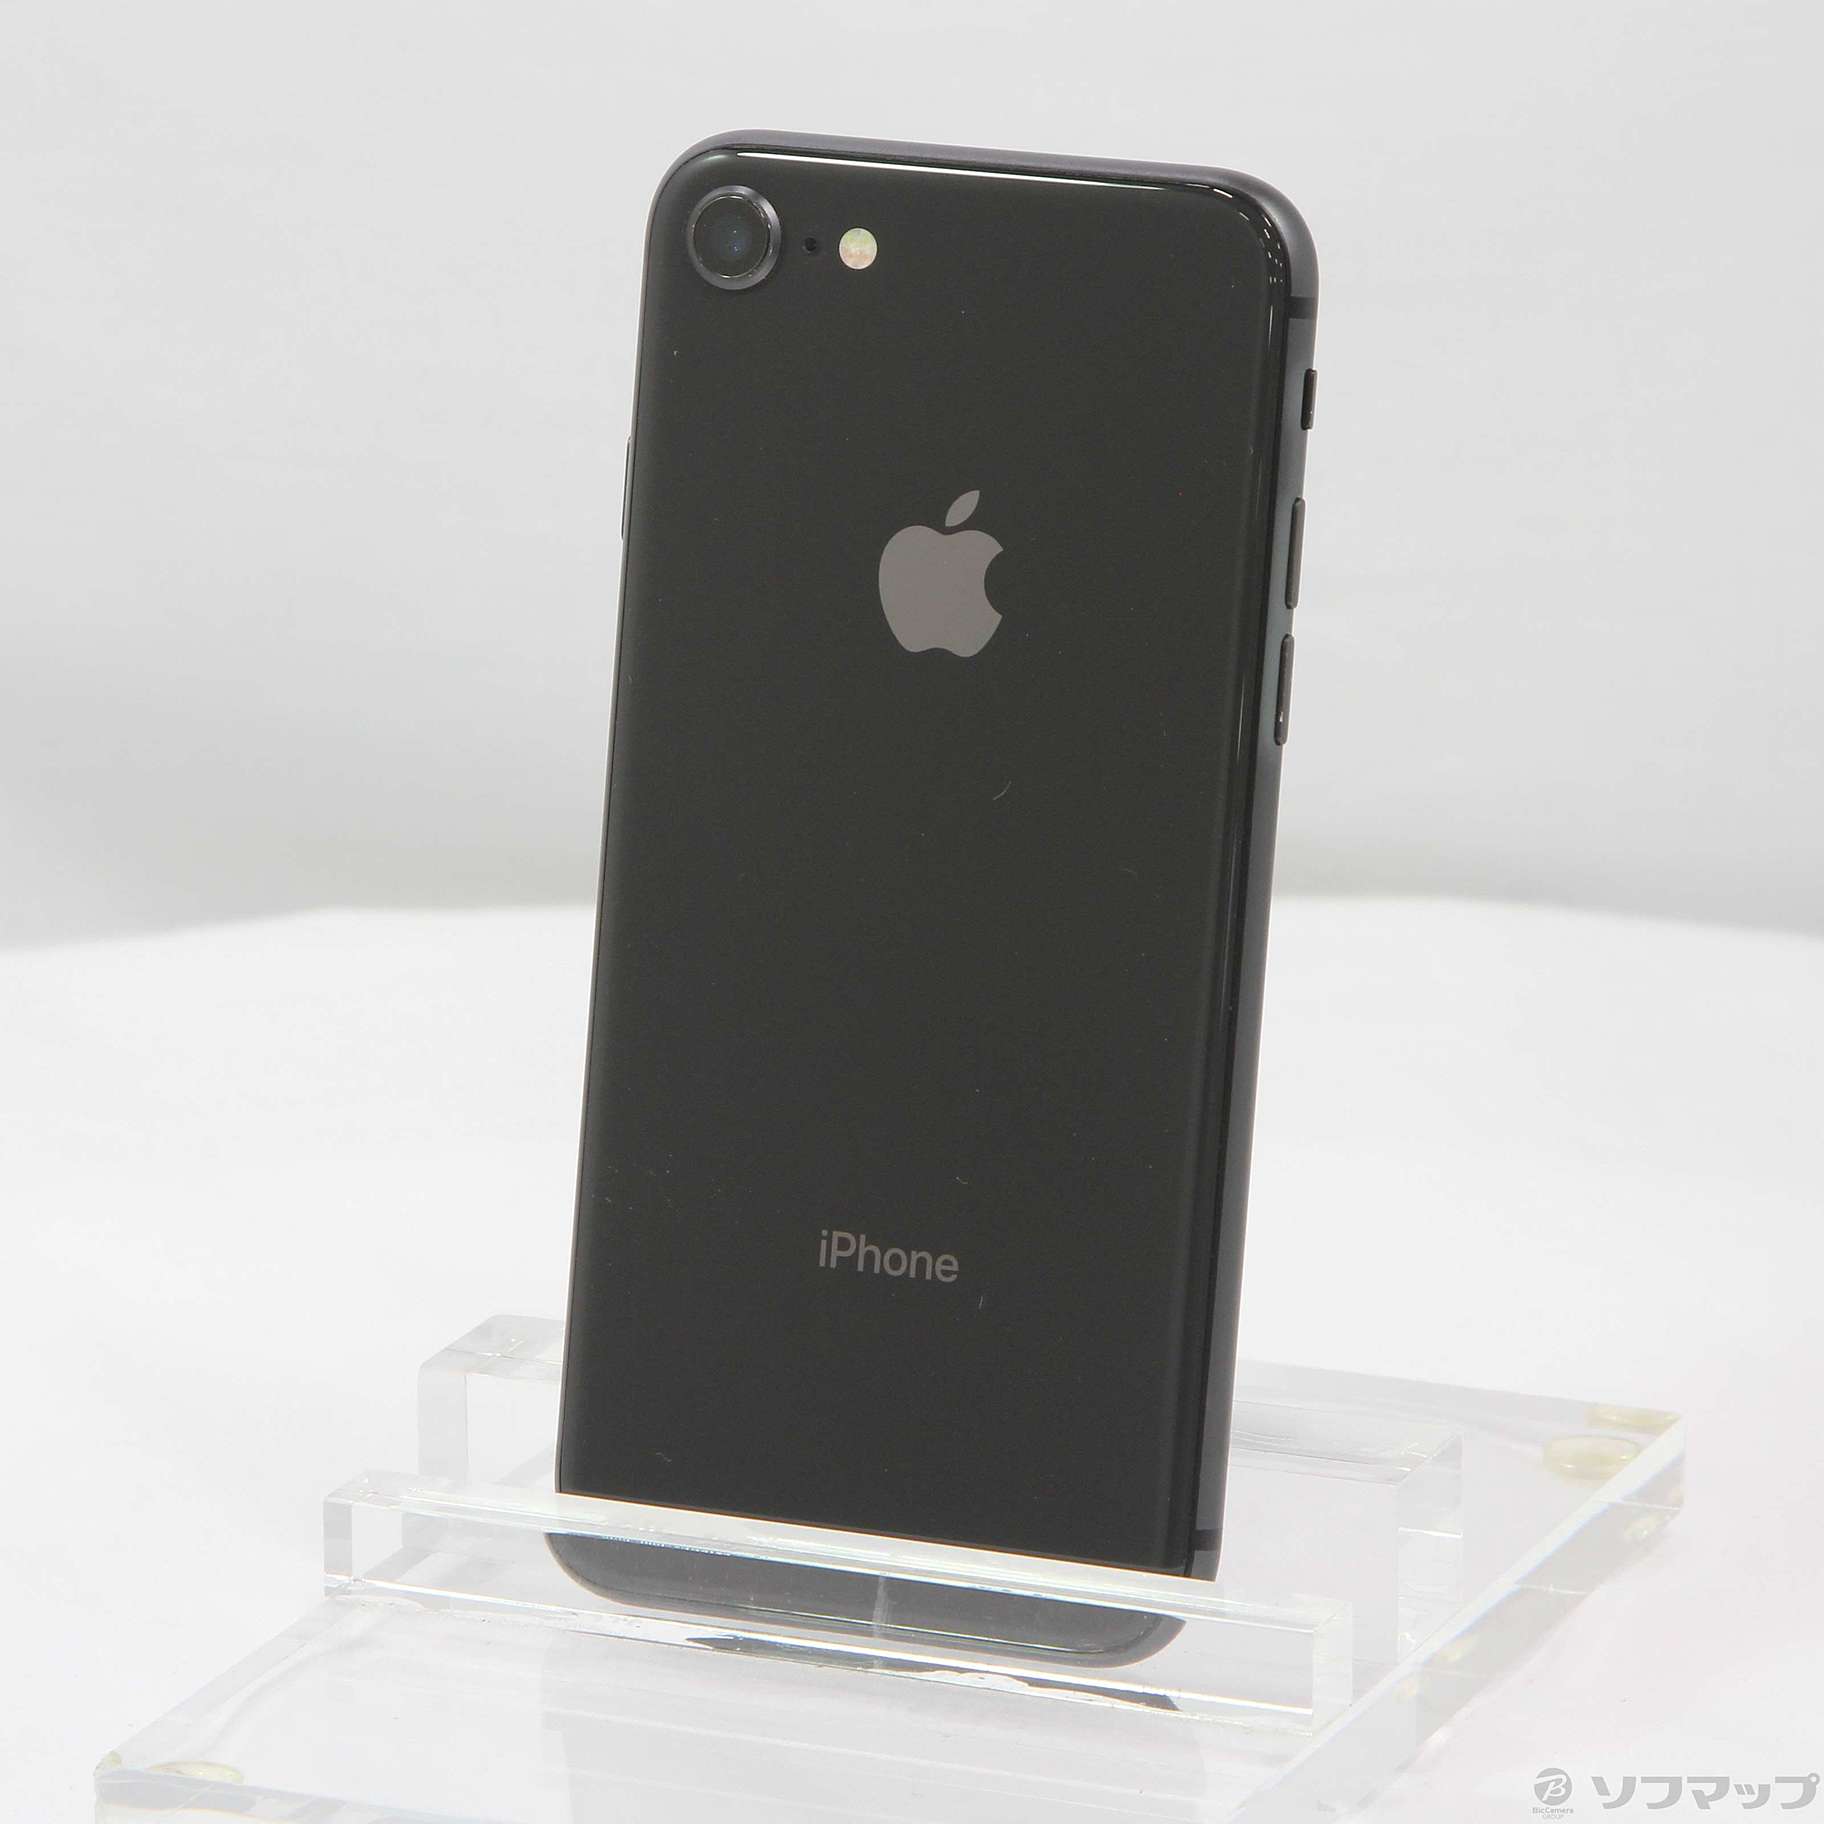 SRGさまiPhone 8 64GB SPACE GRAY